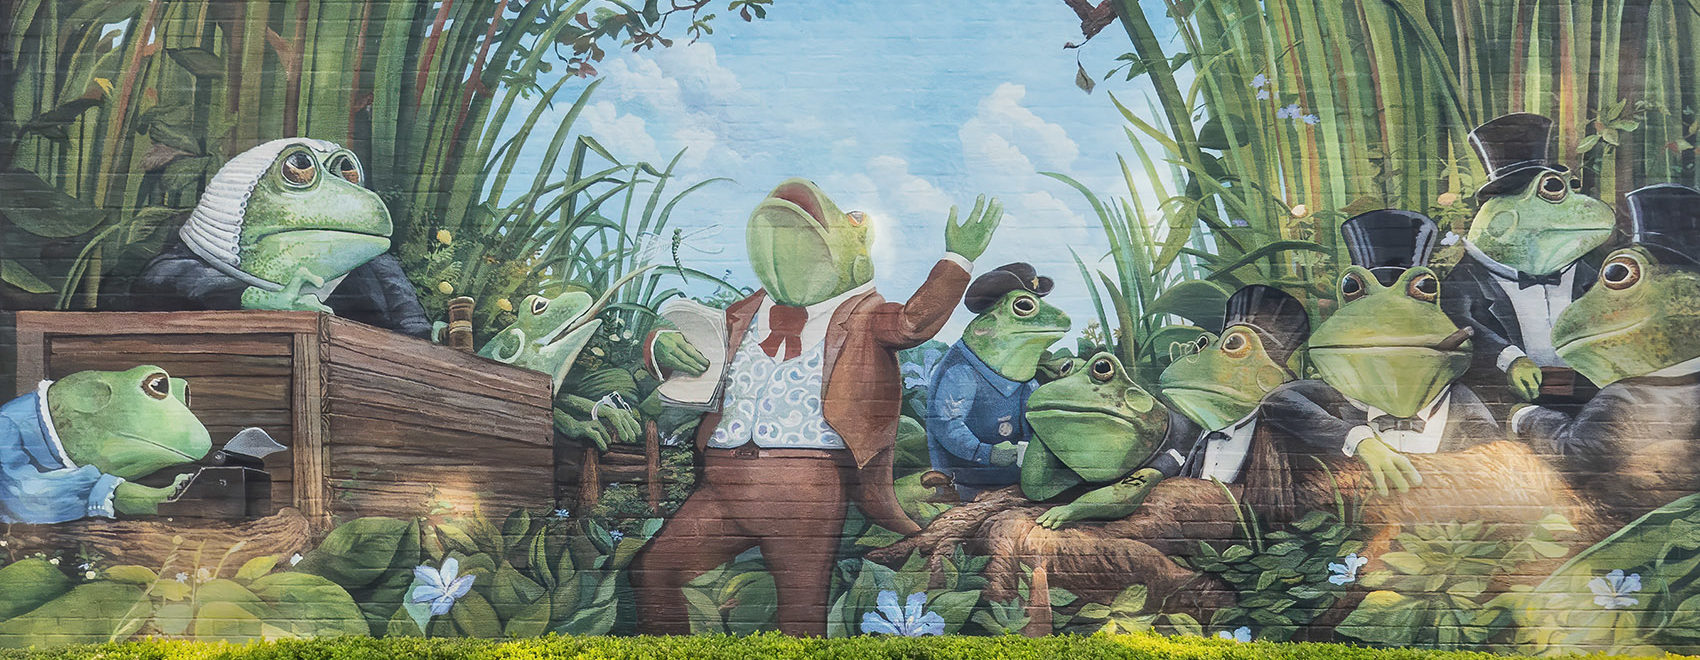 mural showing frogs everywhere in Rayne, Louisiana